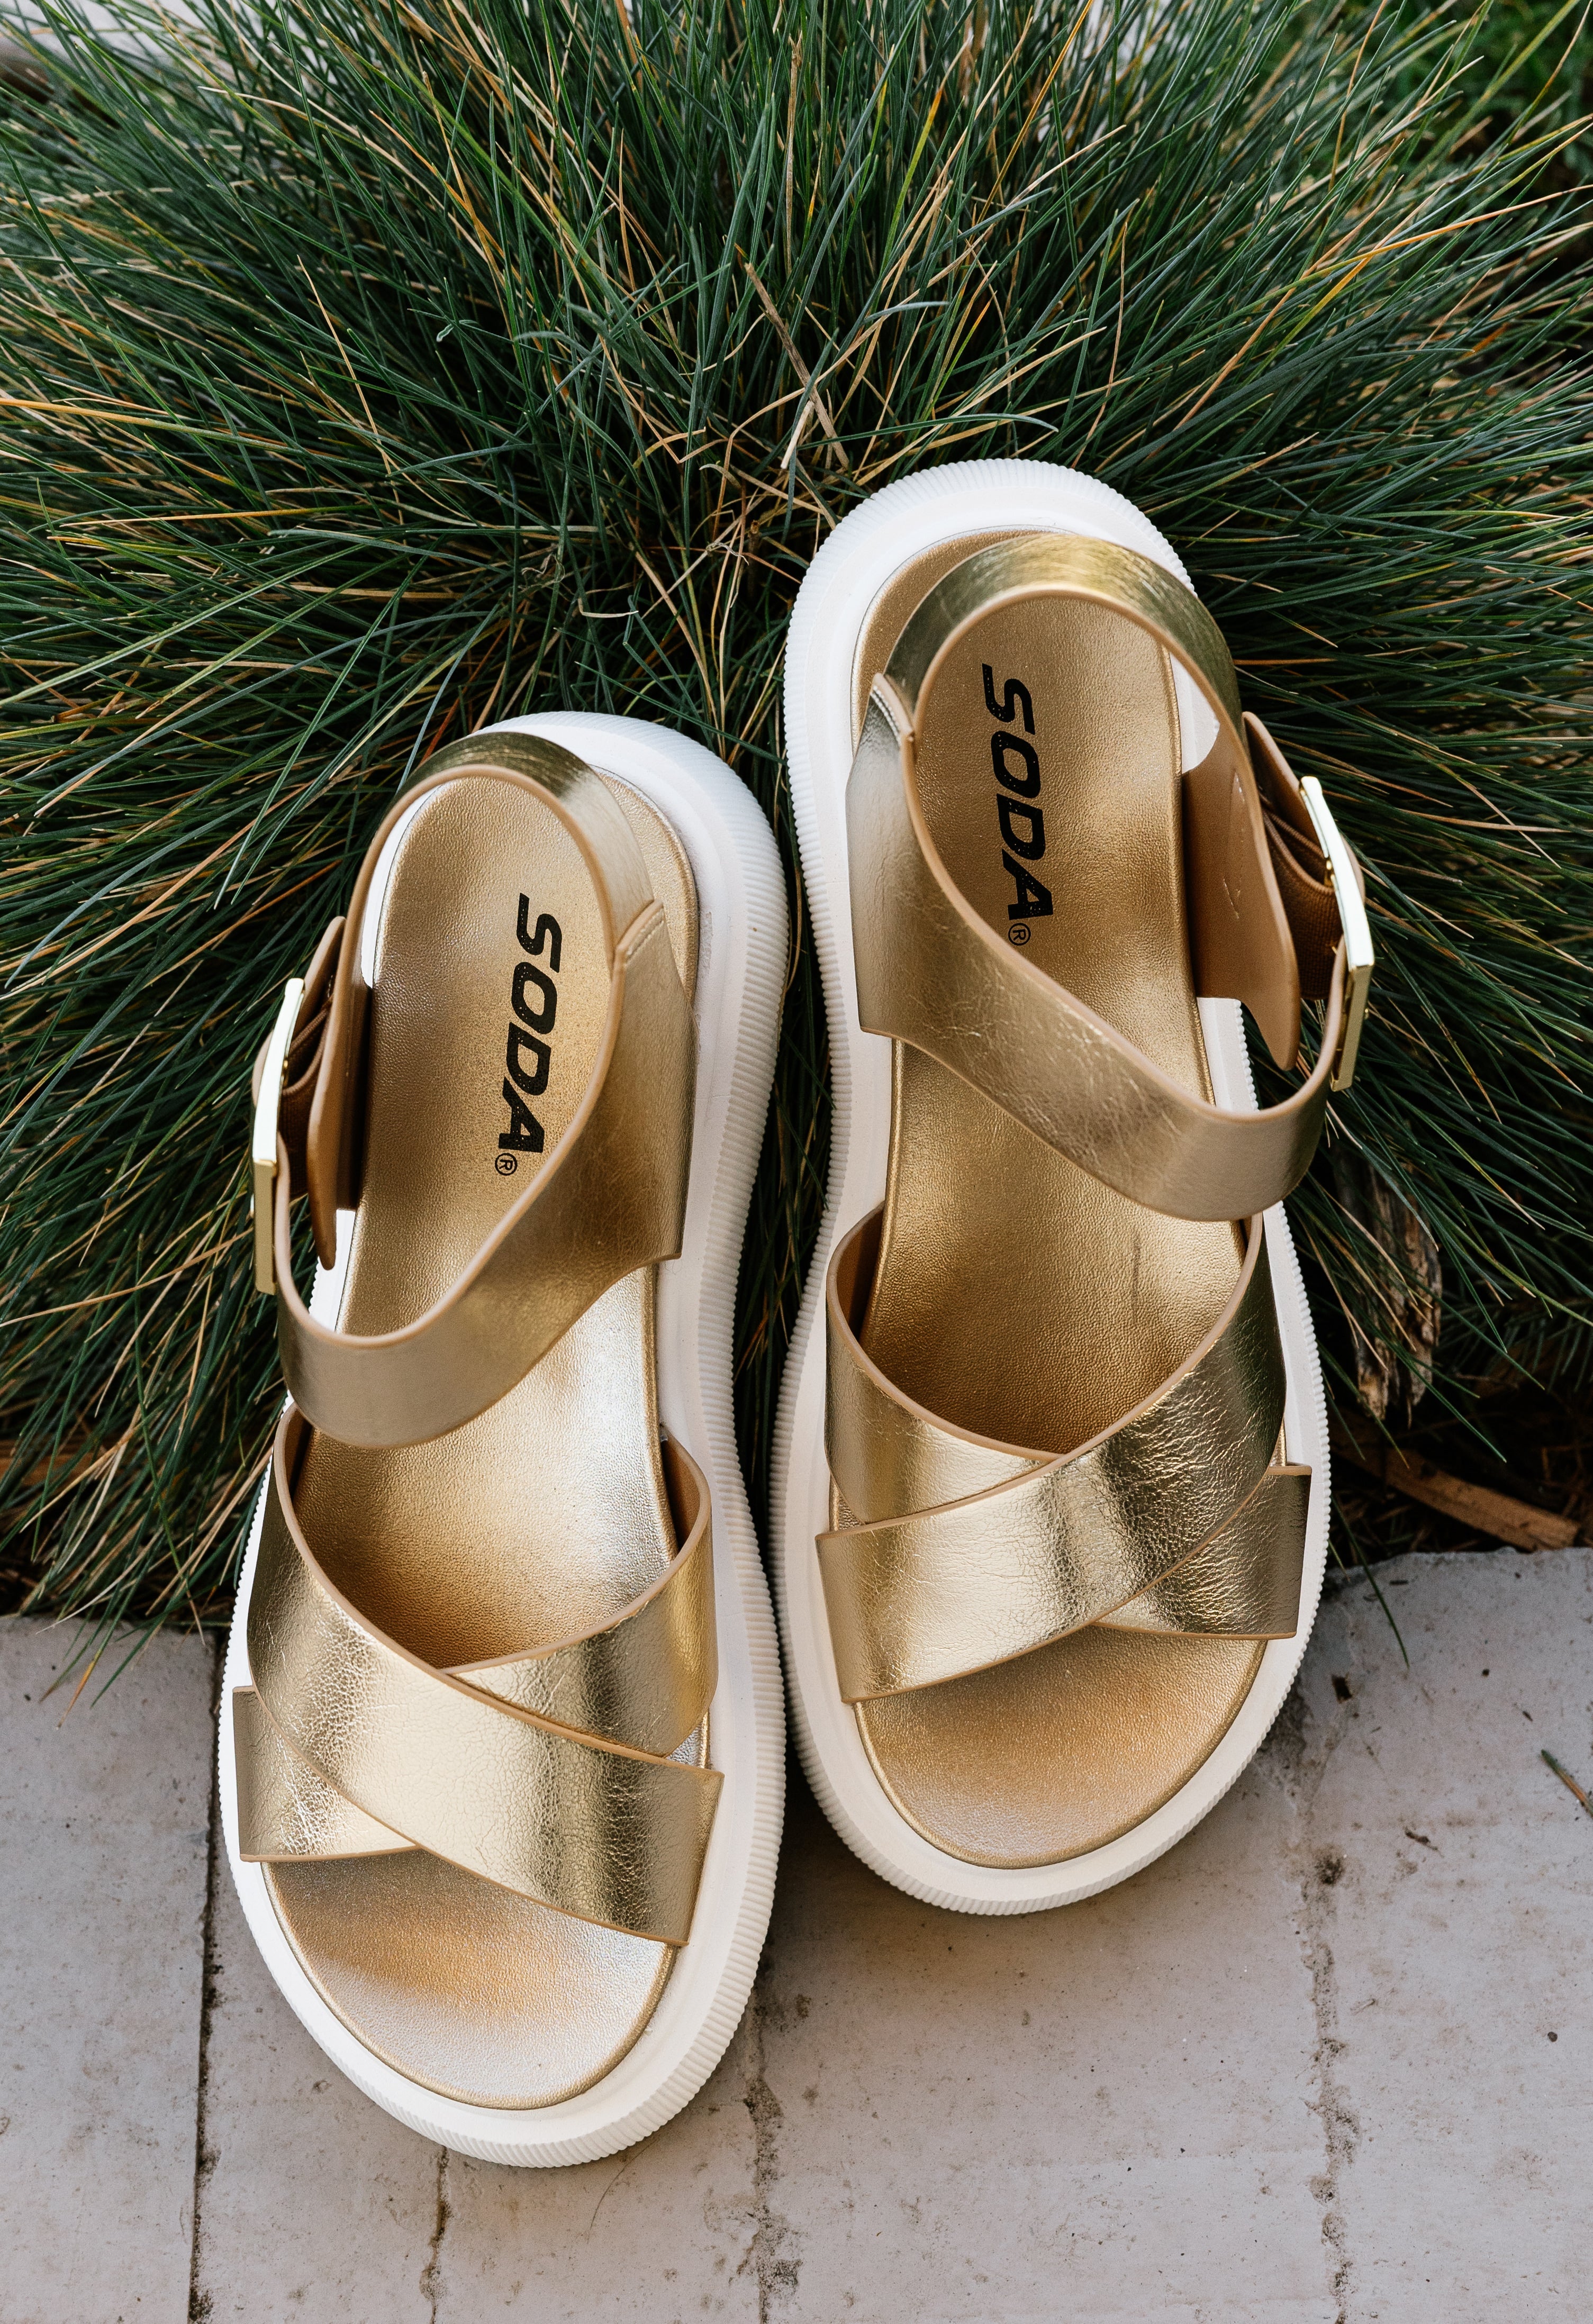 Walkabout Sandals - GOLD - willows clothing Sandals